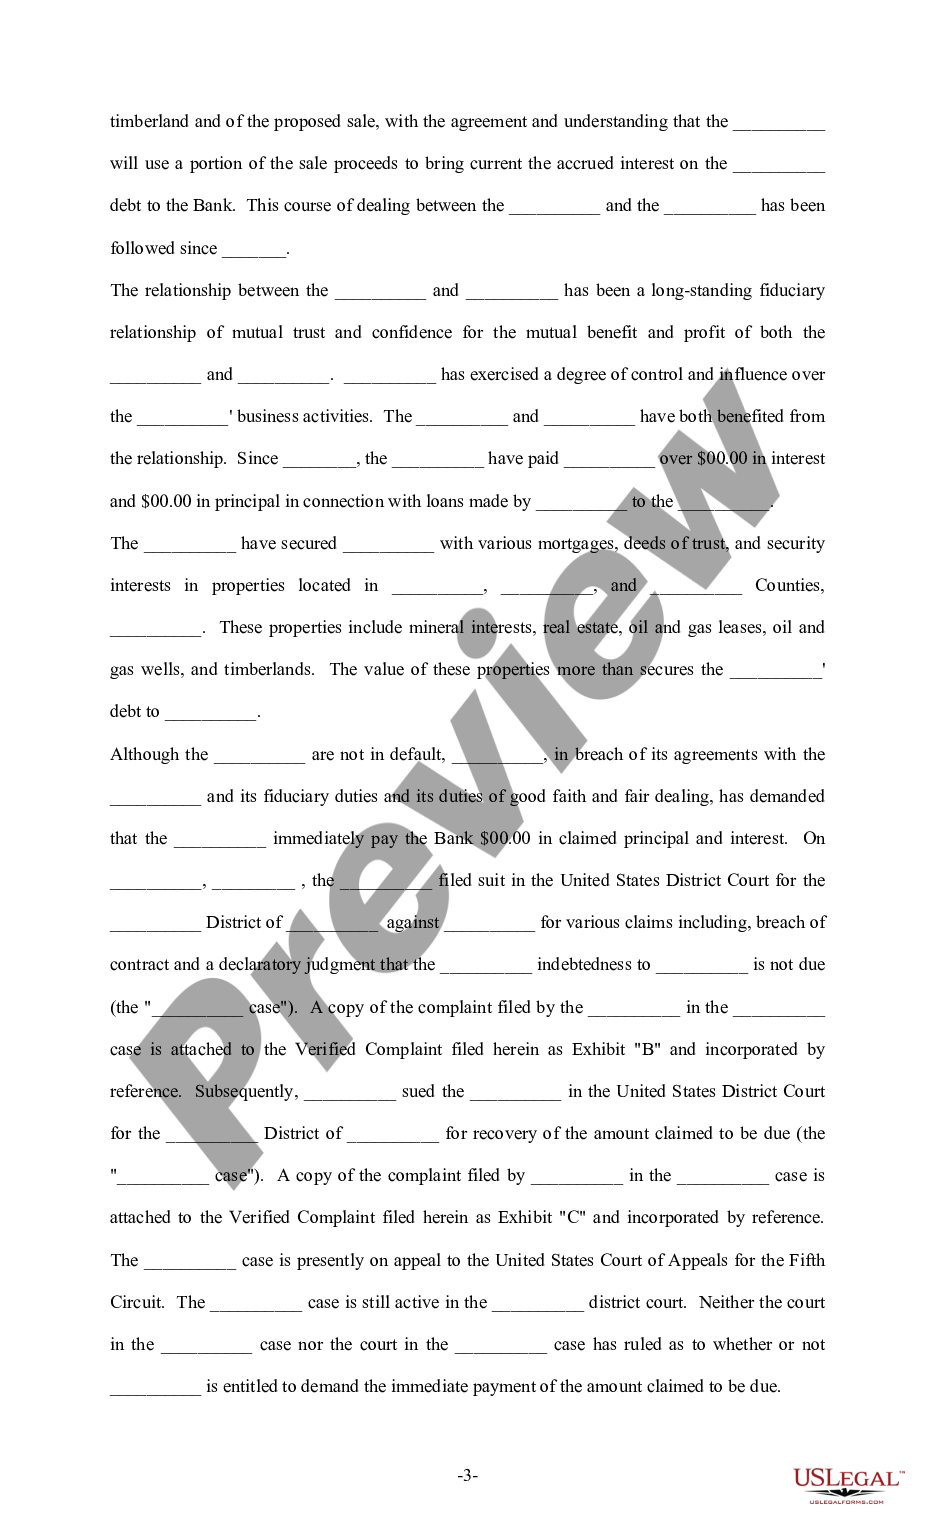 page 2 Sample Brief - Injunction preview